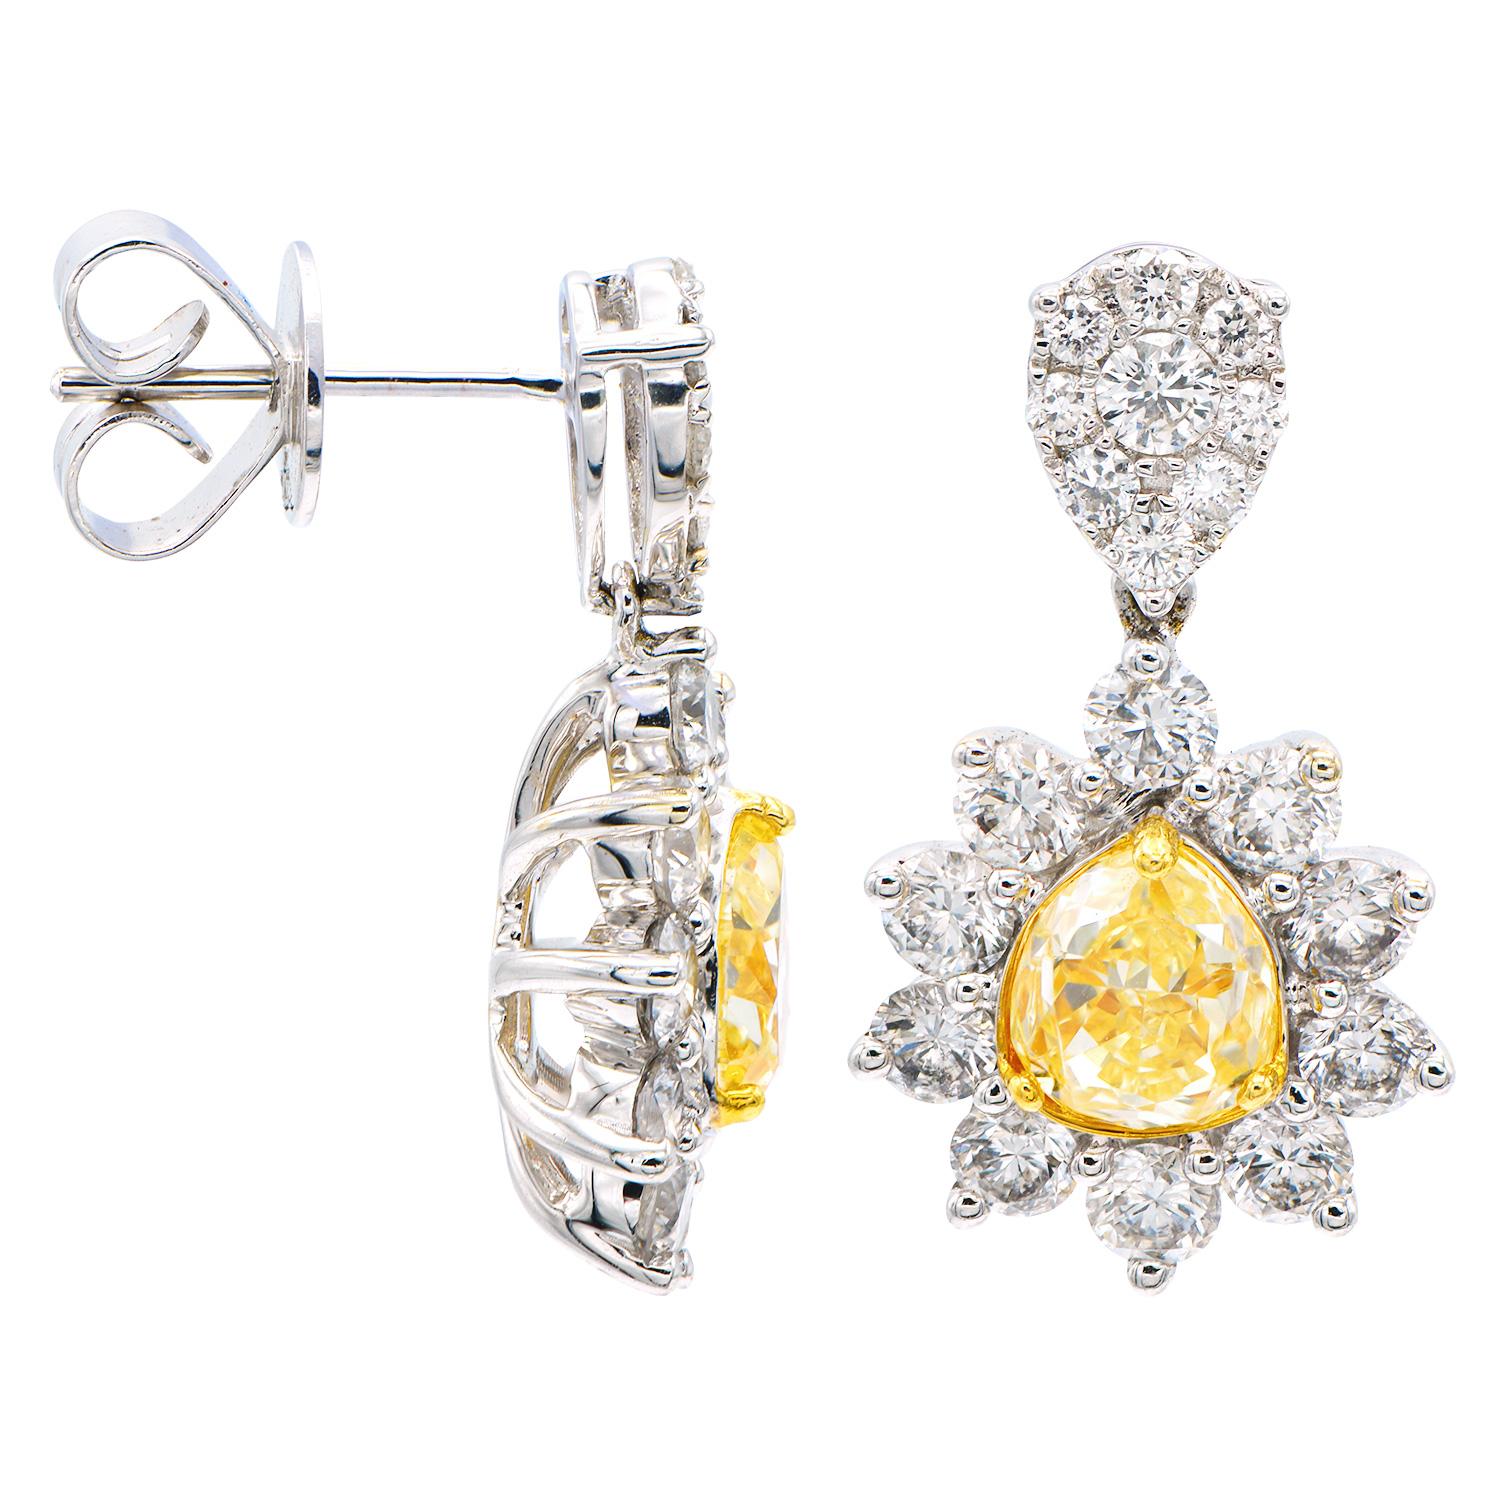 These beautiful earrings contain 2 gorgeous pear cut Yellow Diamonds totaling 2.2 carats which are surrounded by VS2, G color diamonds in a halo around the yellow diamond as well as a diamond cluster on top. There are 38 round diamonds totaling 2.2